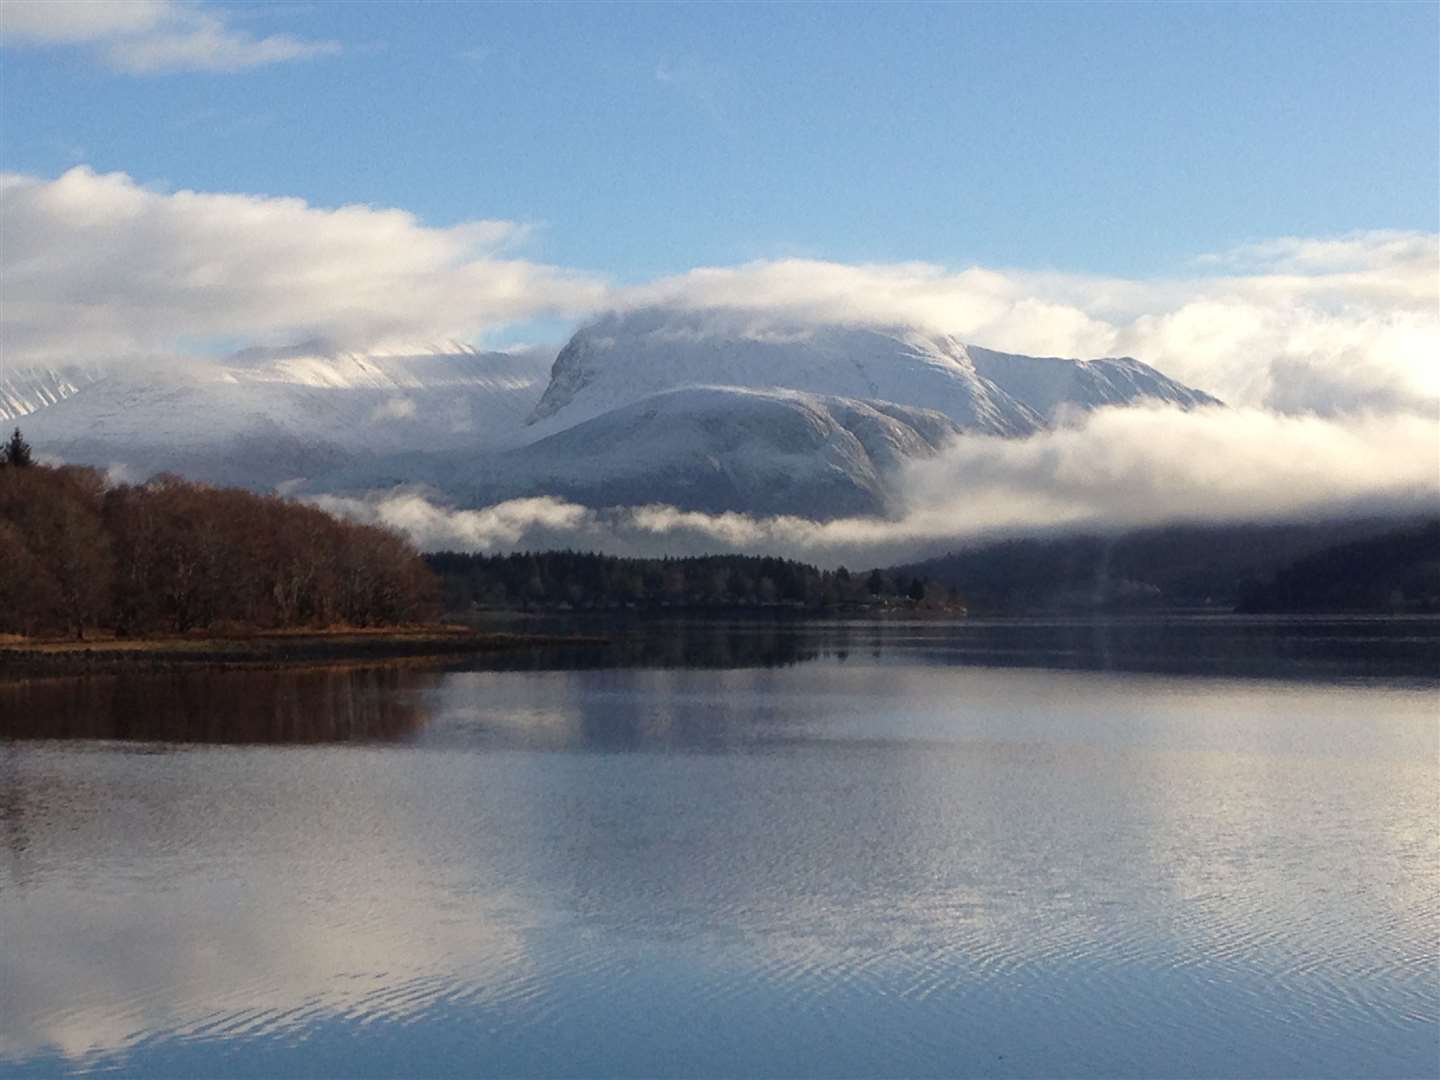 Ben Nevis attracts visitors from around the world to the Fort William area.